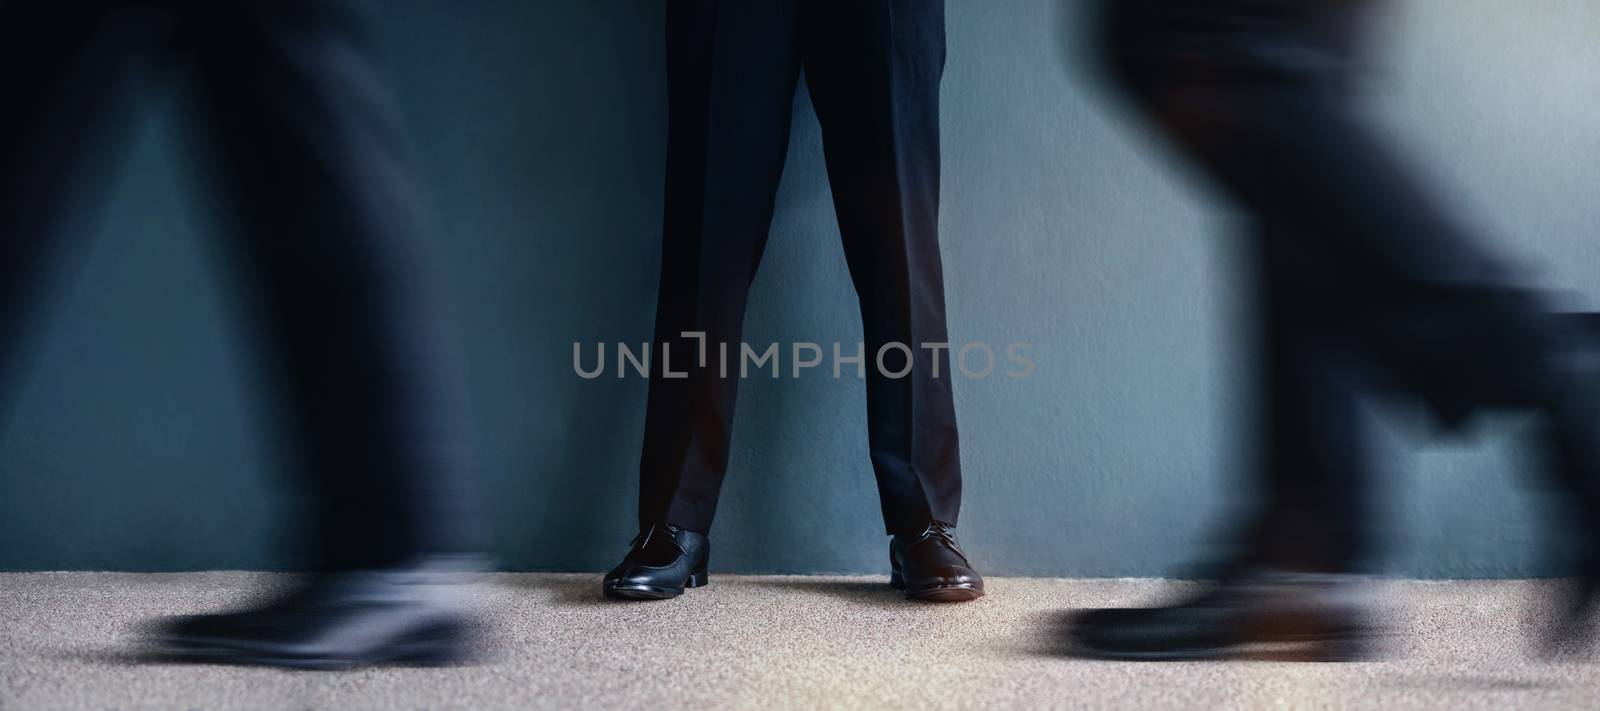 Urban Cool Businessman Standing by the Wall in Confident Posture by Black-Salmon